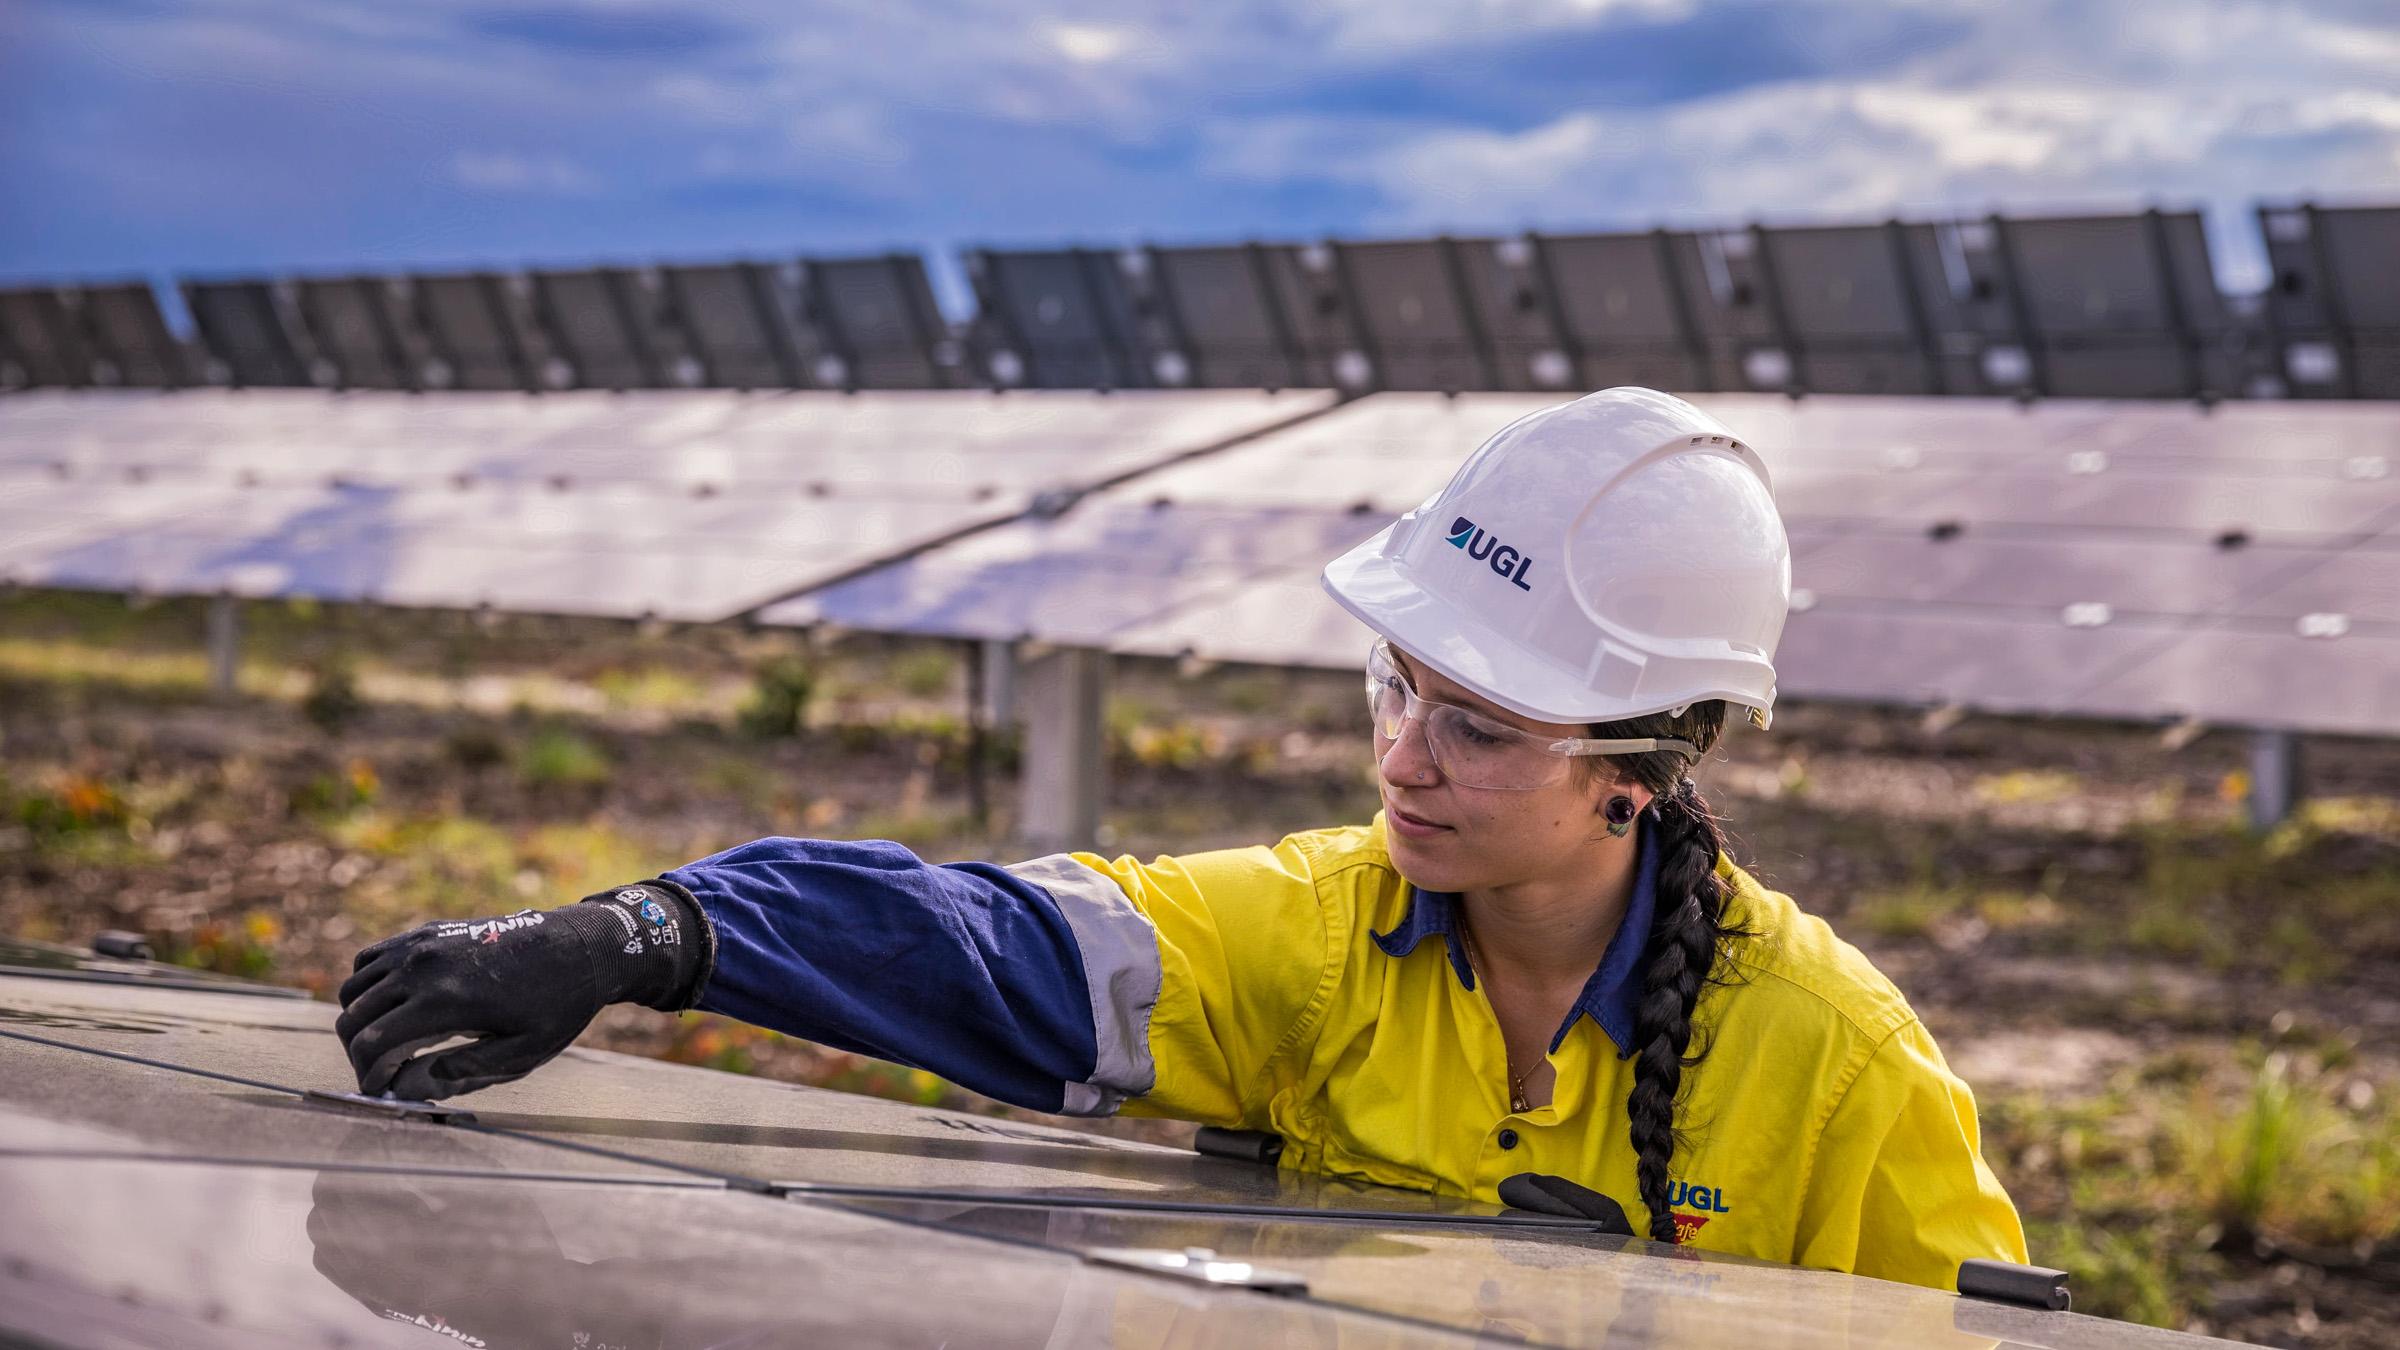 Worker, wearing high-vis and safety equipment,  maintaining a solar panel